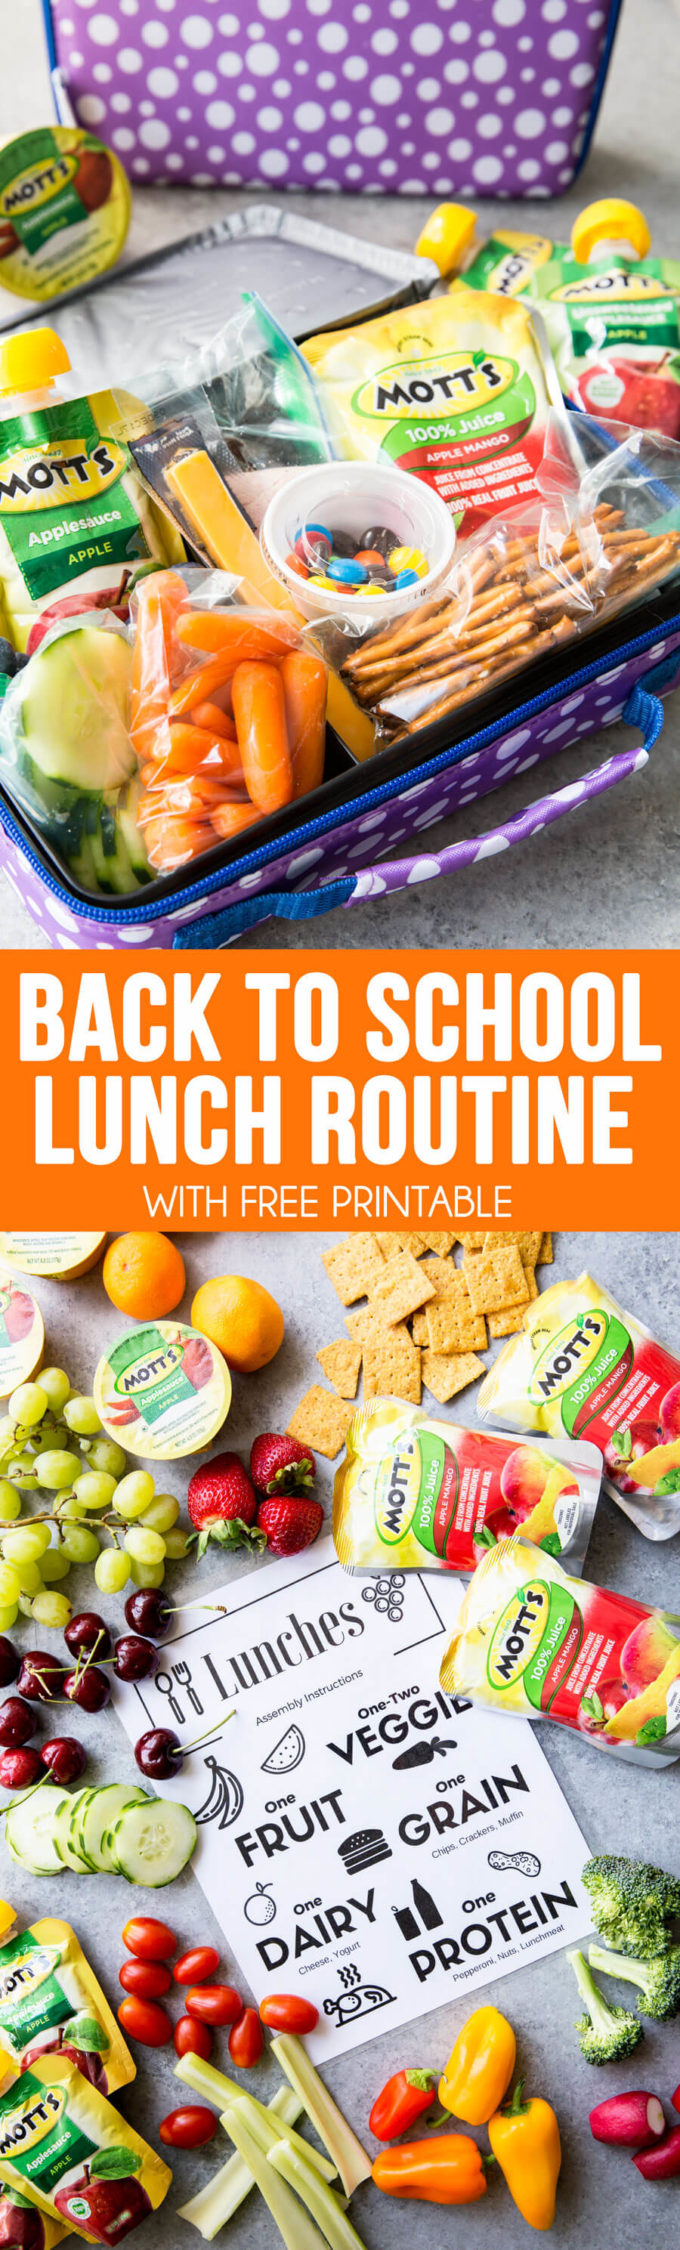 Back to School Lunch Routines